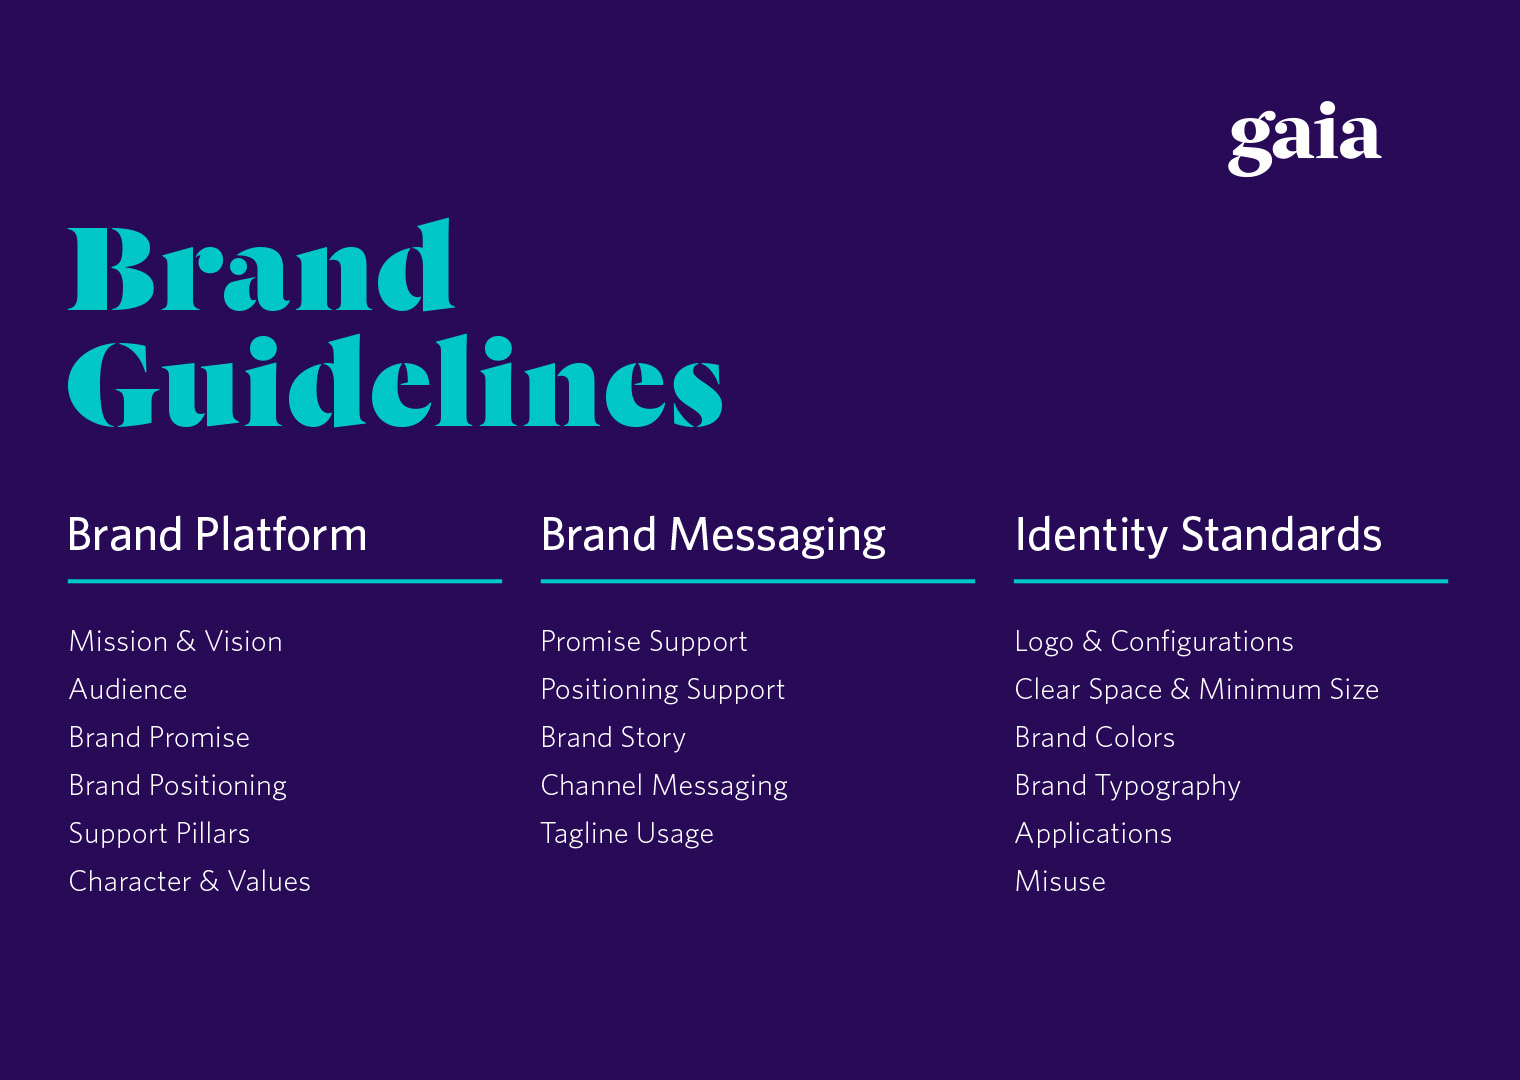 Gaia brand guidelines